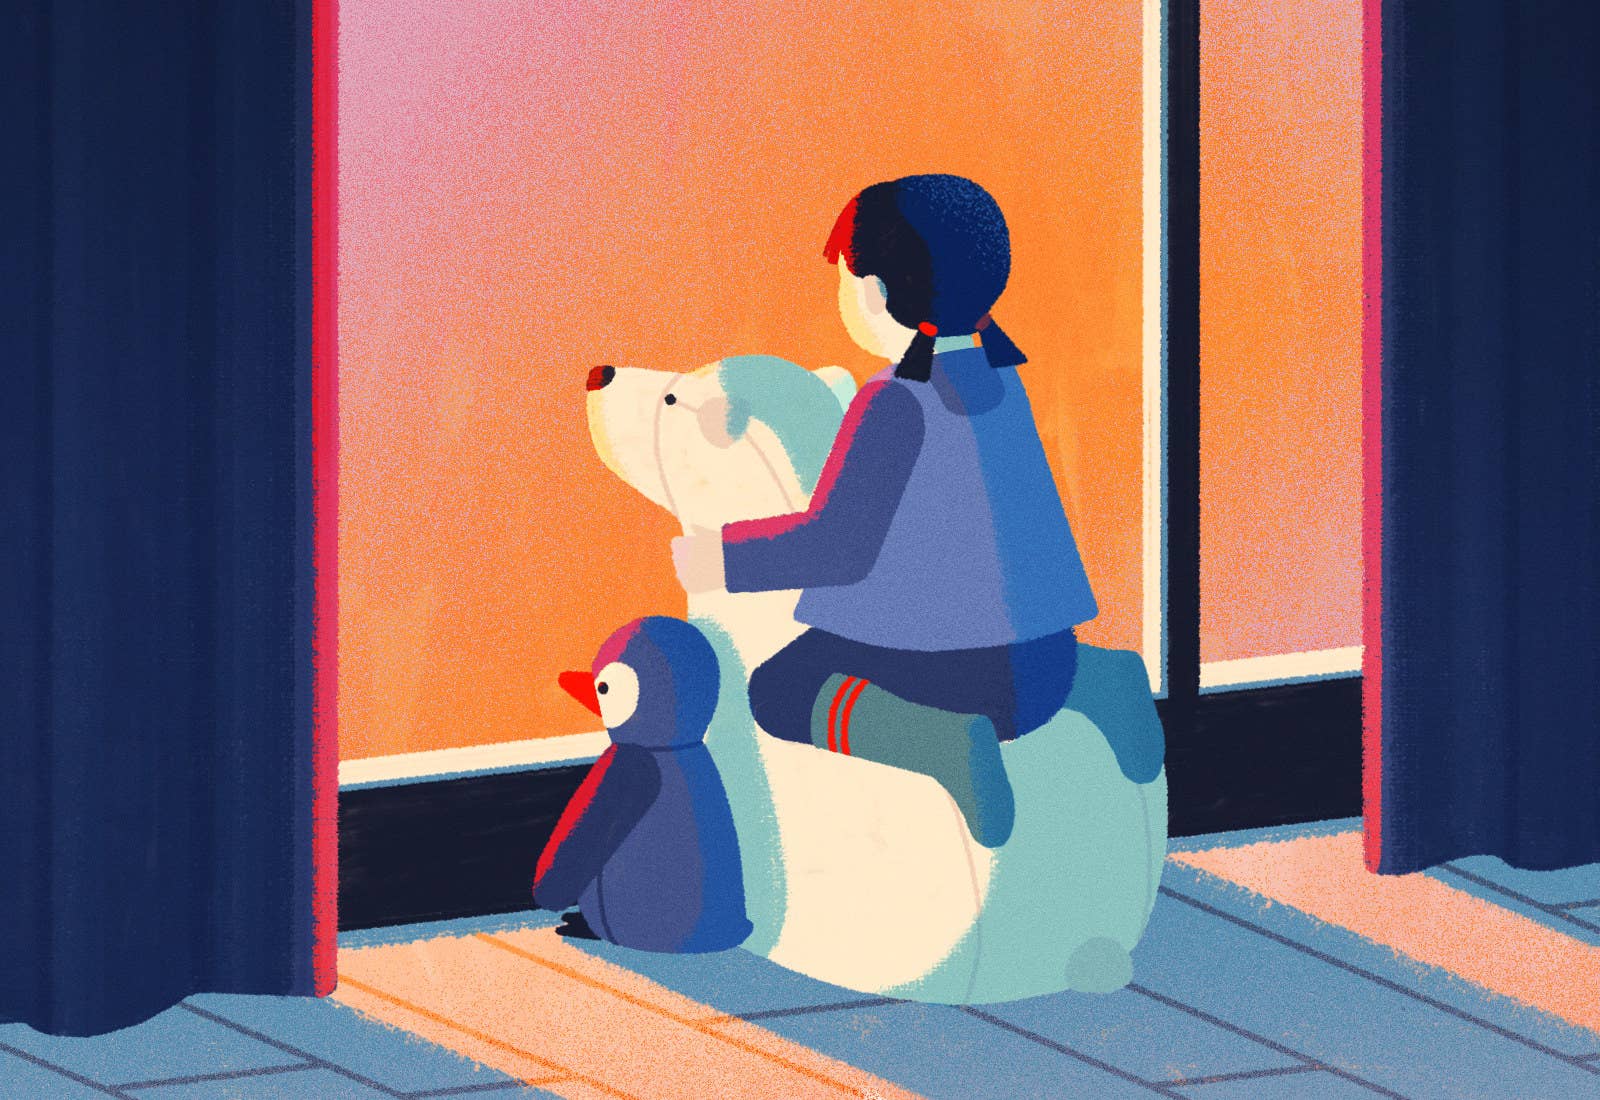 Illustration of a child sitting on top of a stuffed polar bear, with a stuffed penguin beside her looks out a window at extreme weather